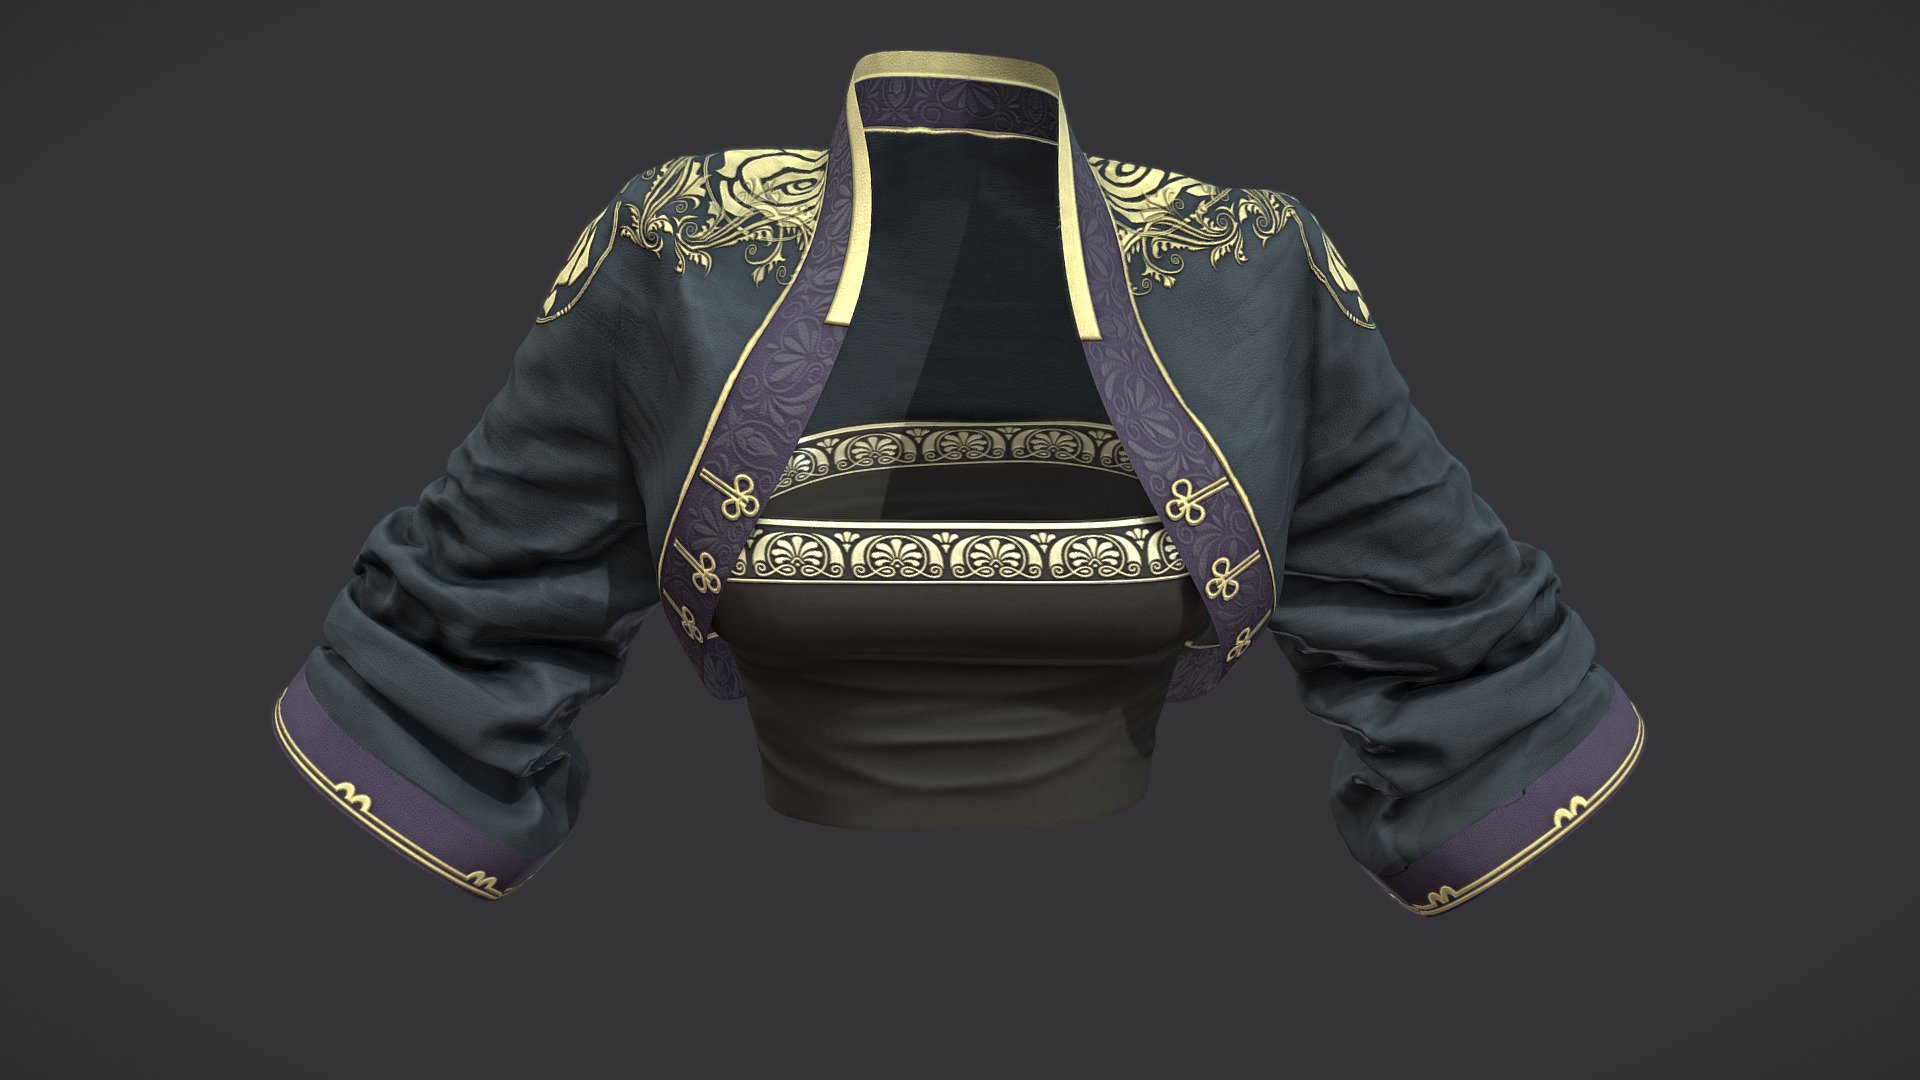 Female Traditional Bolero Jacket Tube Top Combo

Can be fitted to any character

Clean topology

No overlapping smart optimized unwrapped UVs

High-quality realistic textures

FBX, OBJ, gITF, USDZ (request other formats)

PBR or Classic

Type     user:3dia &ldquo;search term